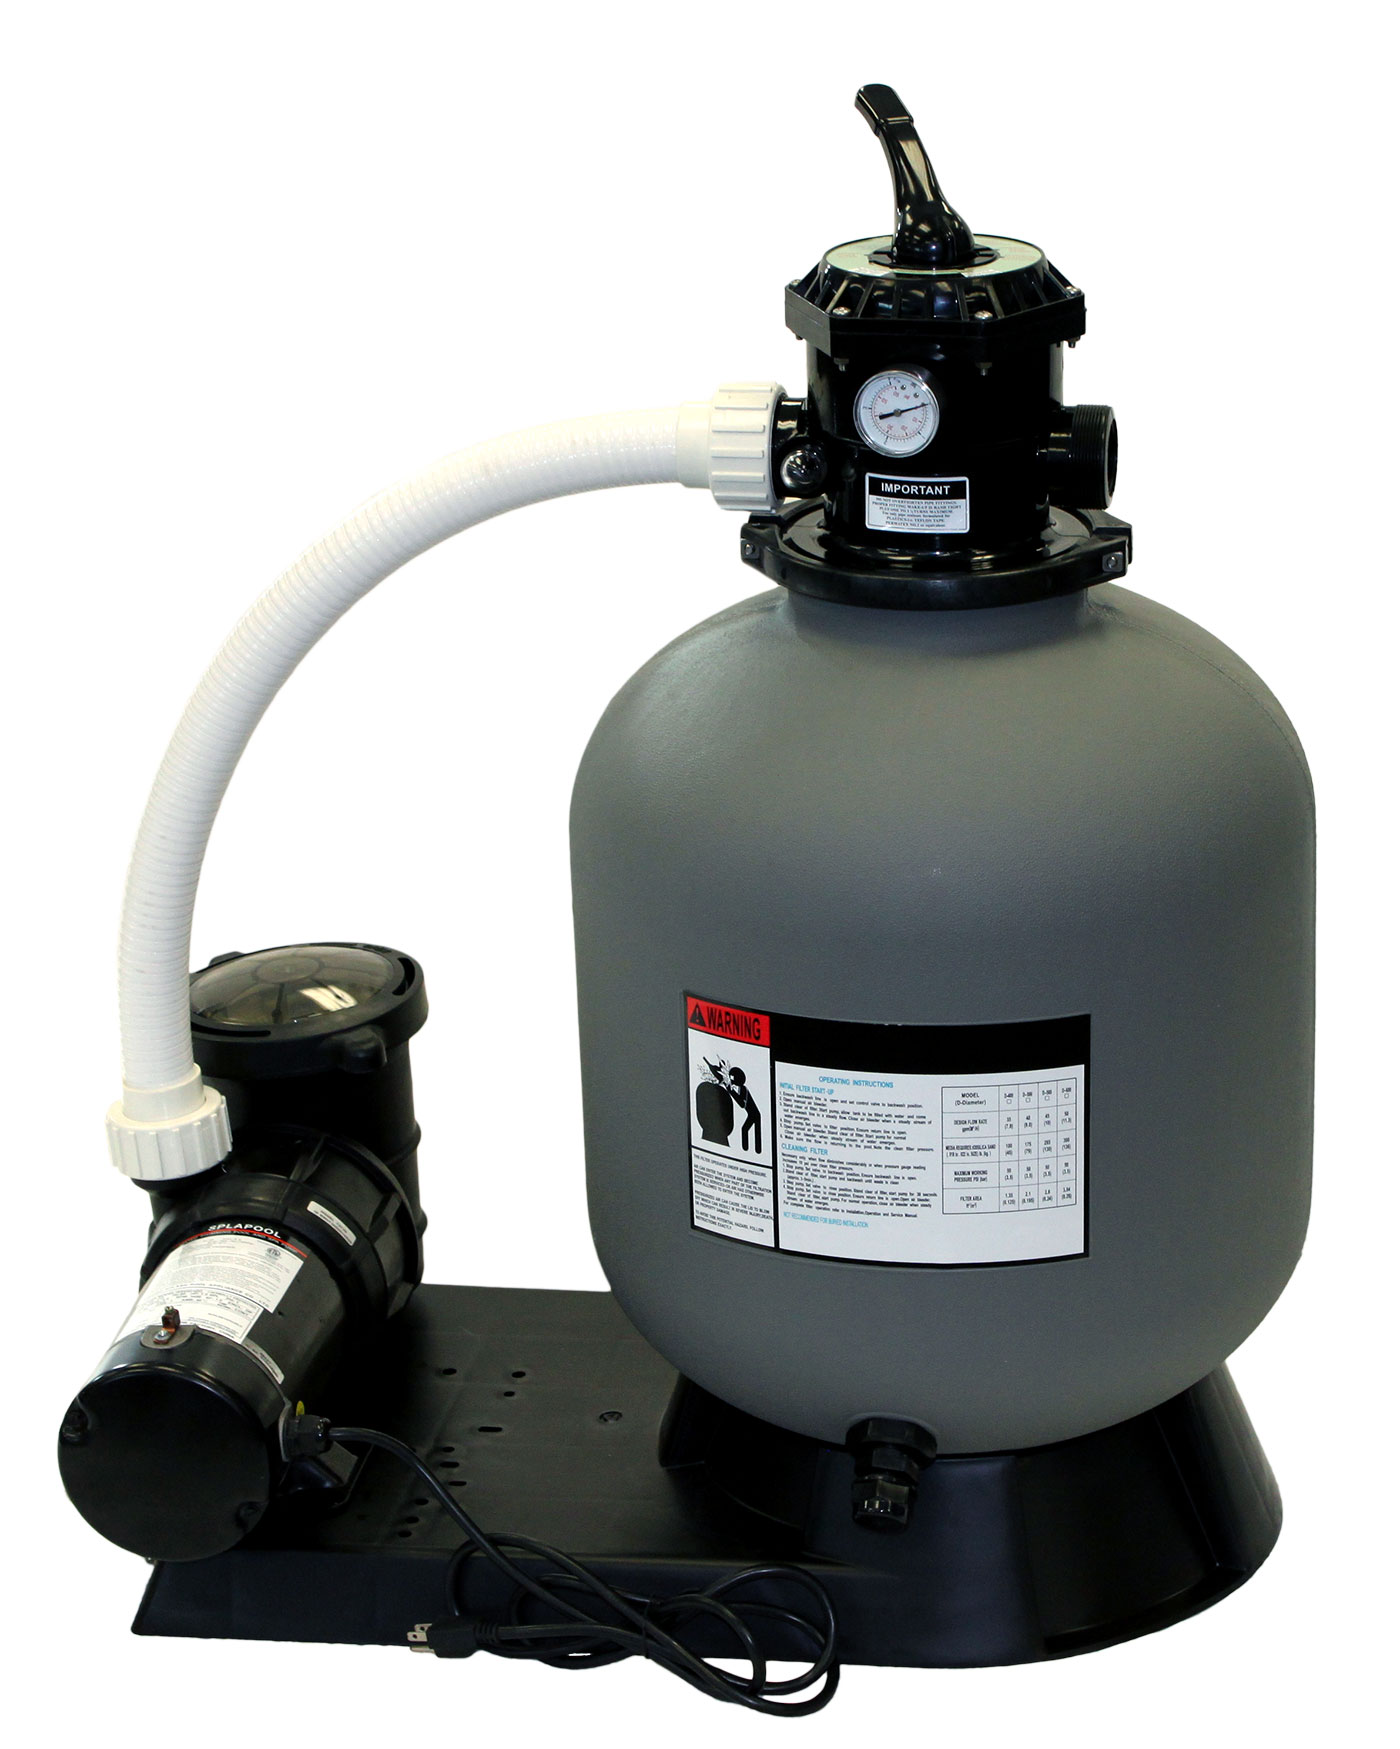 Sand filters are the cheapest, most common and